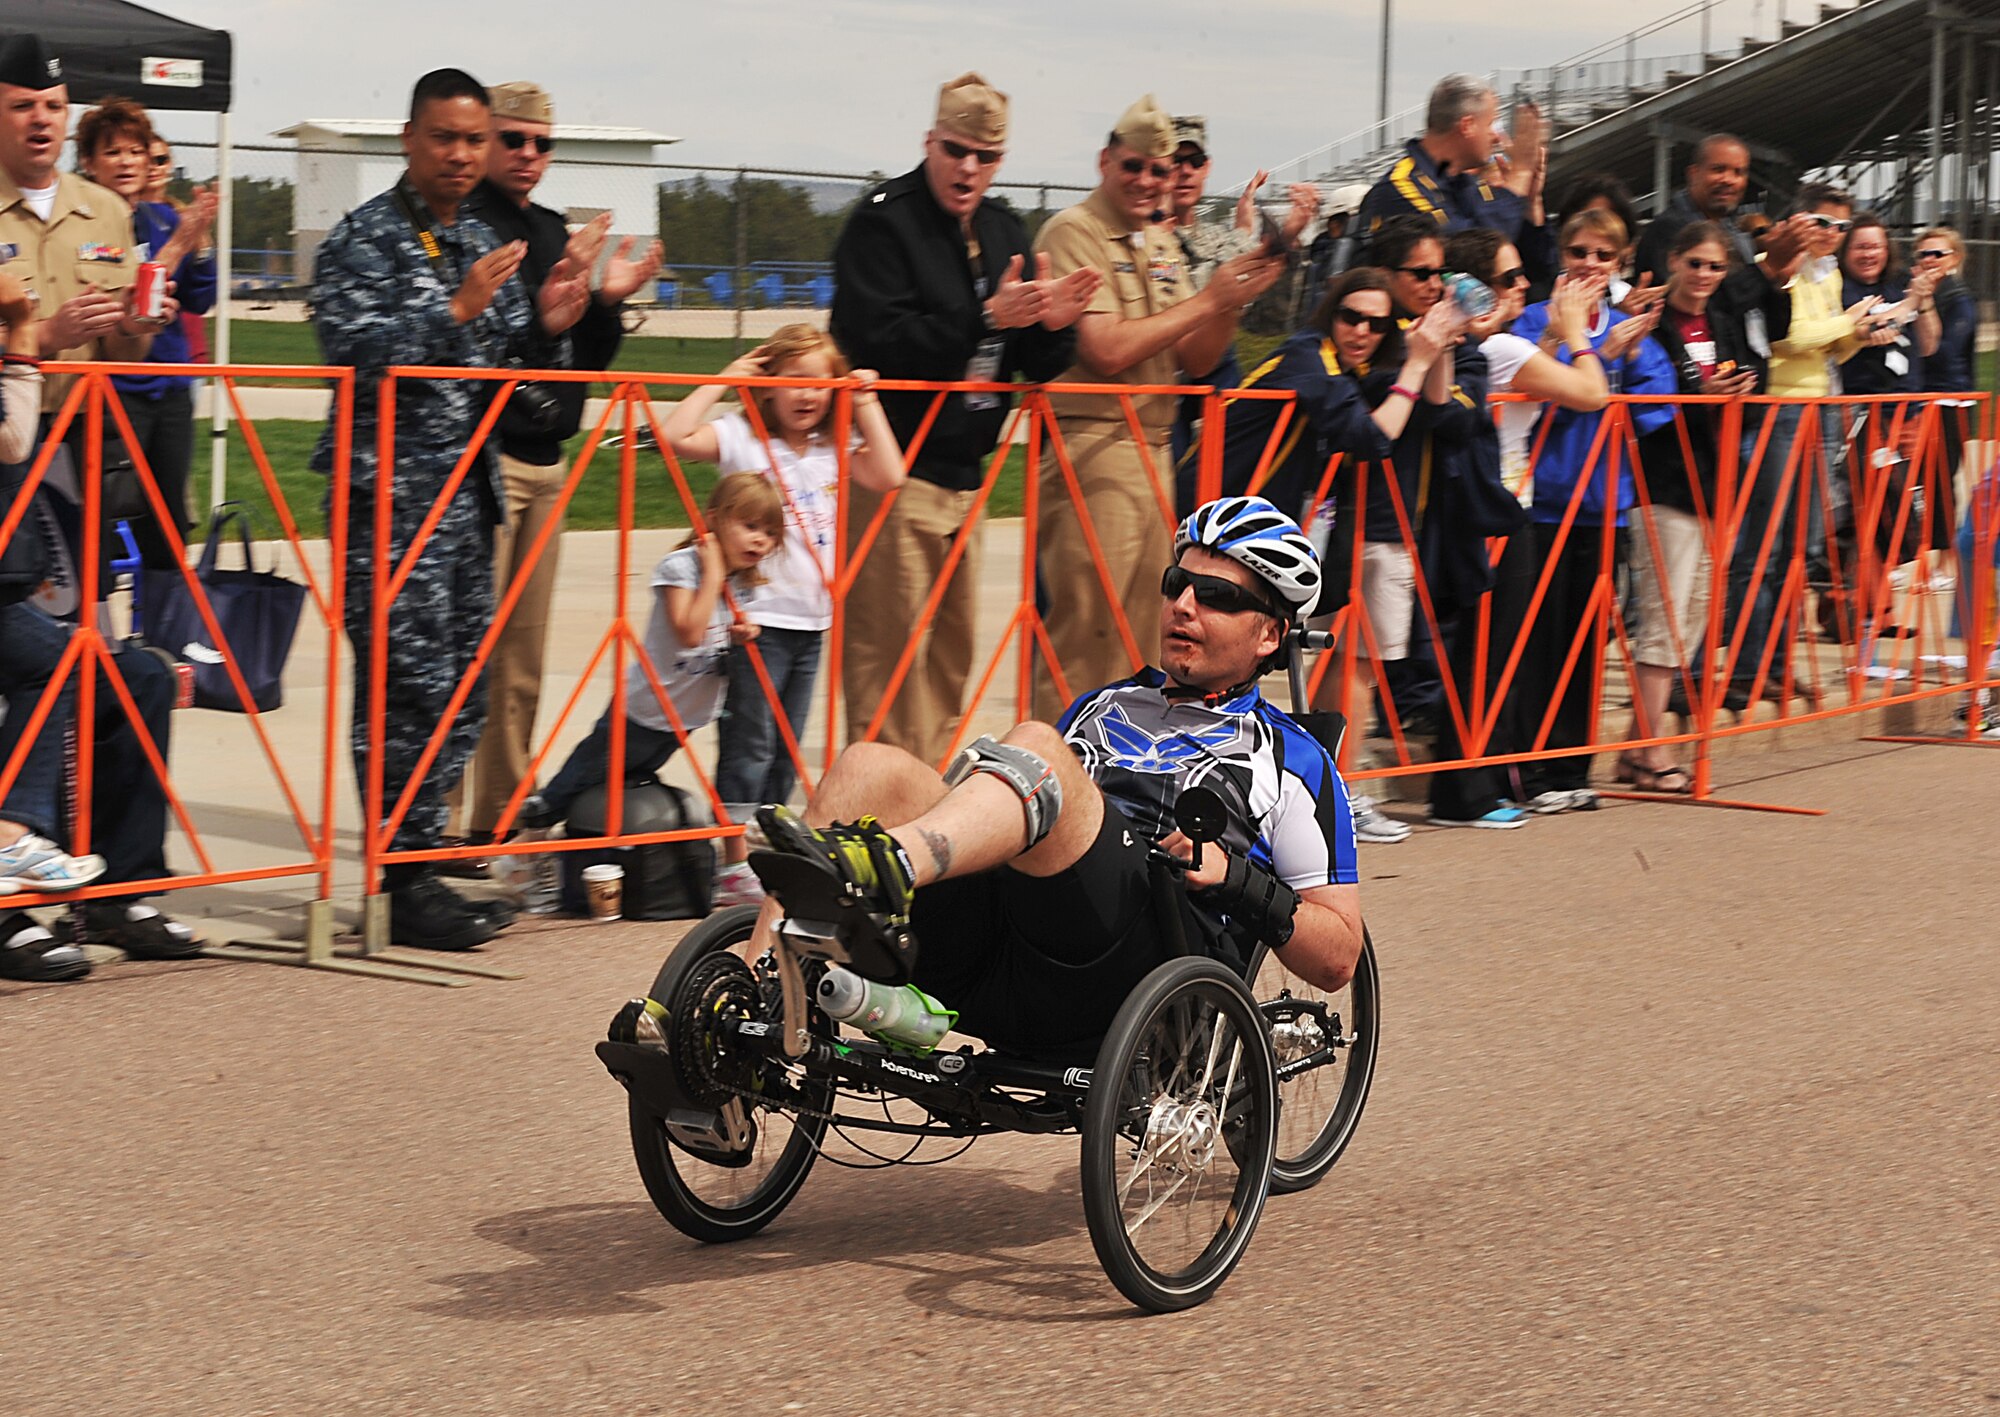 U.S. Air Force Capt. Anthony Simone is cheered by the crowd as he heads to the finish line while taking part in a cycling event of Warrior Games 2012 at the U.S. Air Force Academy in Colorado Springs, Colo., April 30, 2012. (U.S. Air Force photo by Val Gempis/Released)